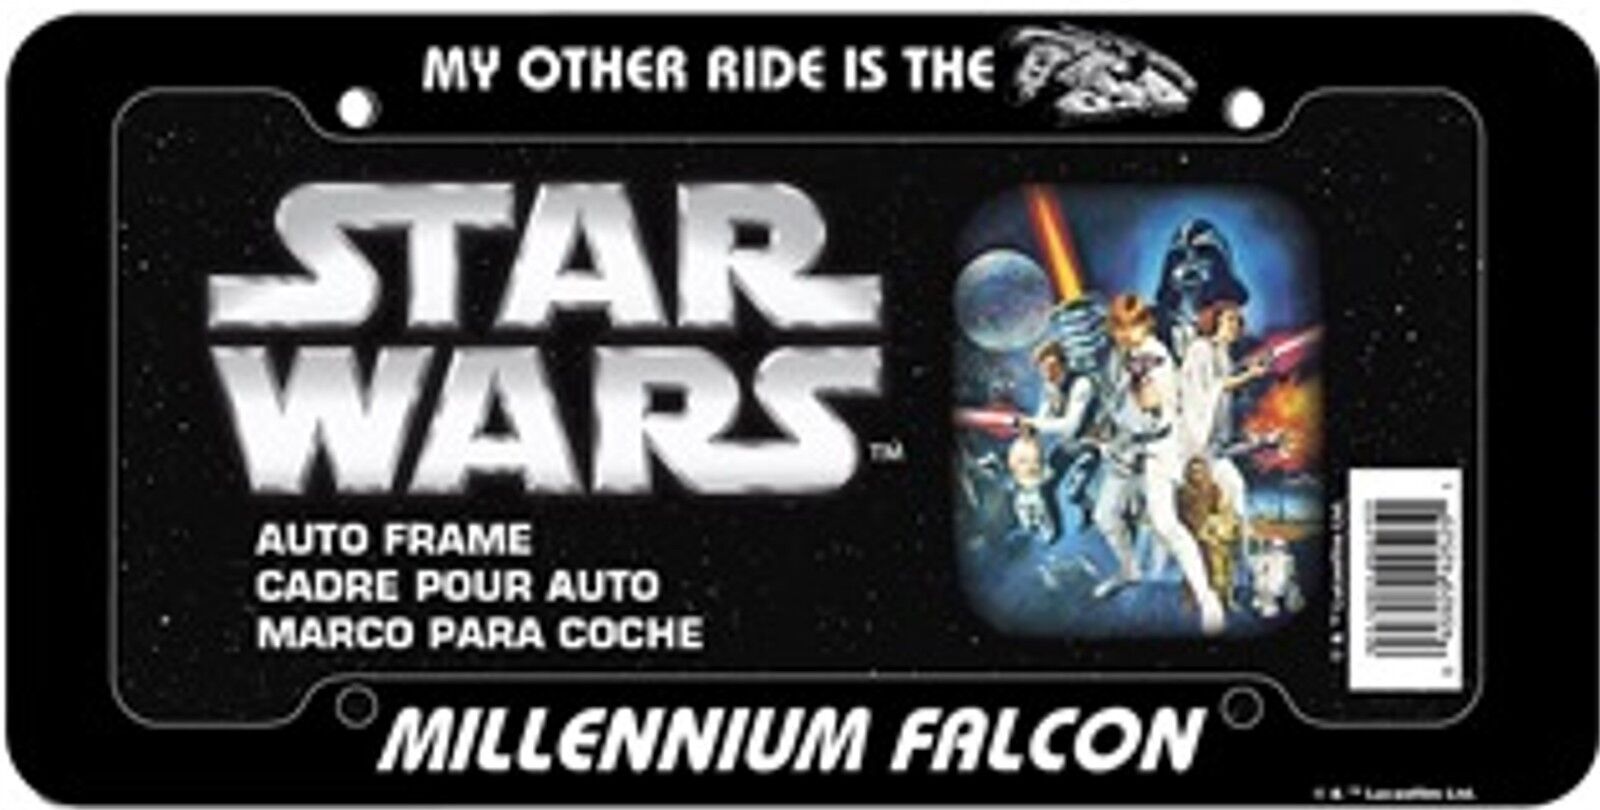 Star Wars My Other Ride Is The Millennium Falcon Plastic Car License Plate Frame